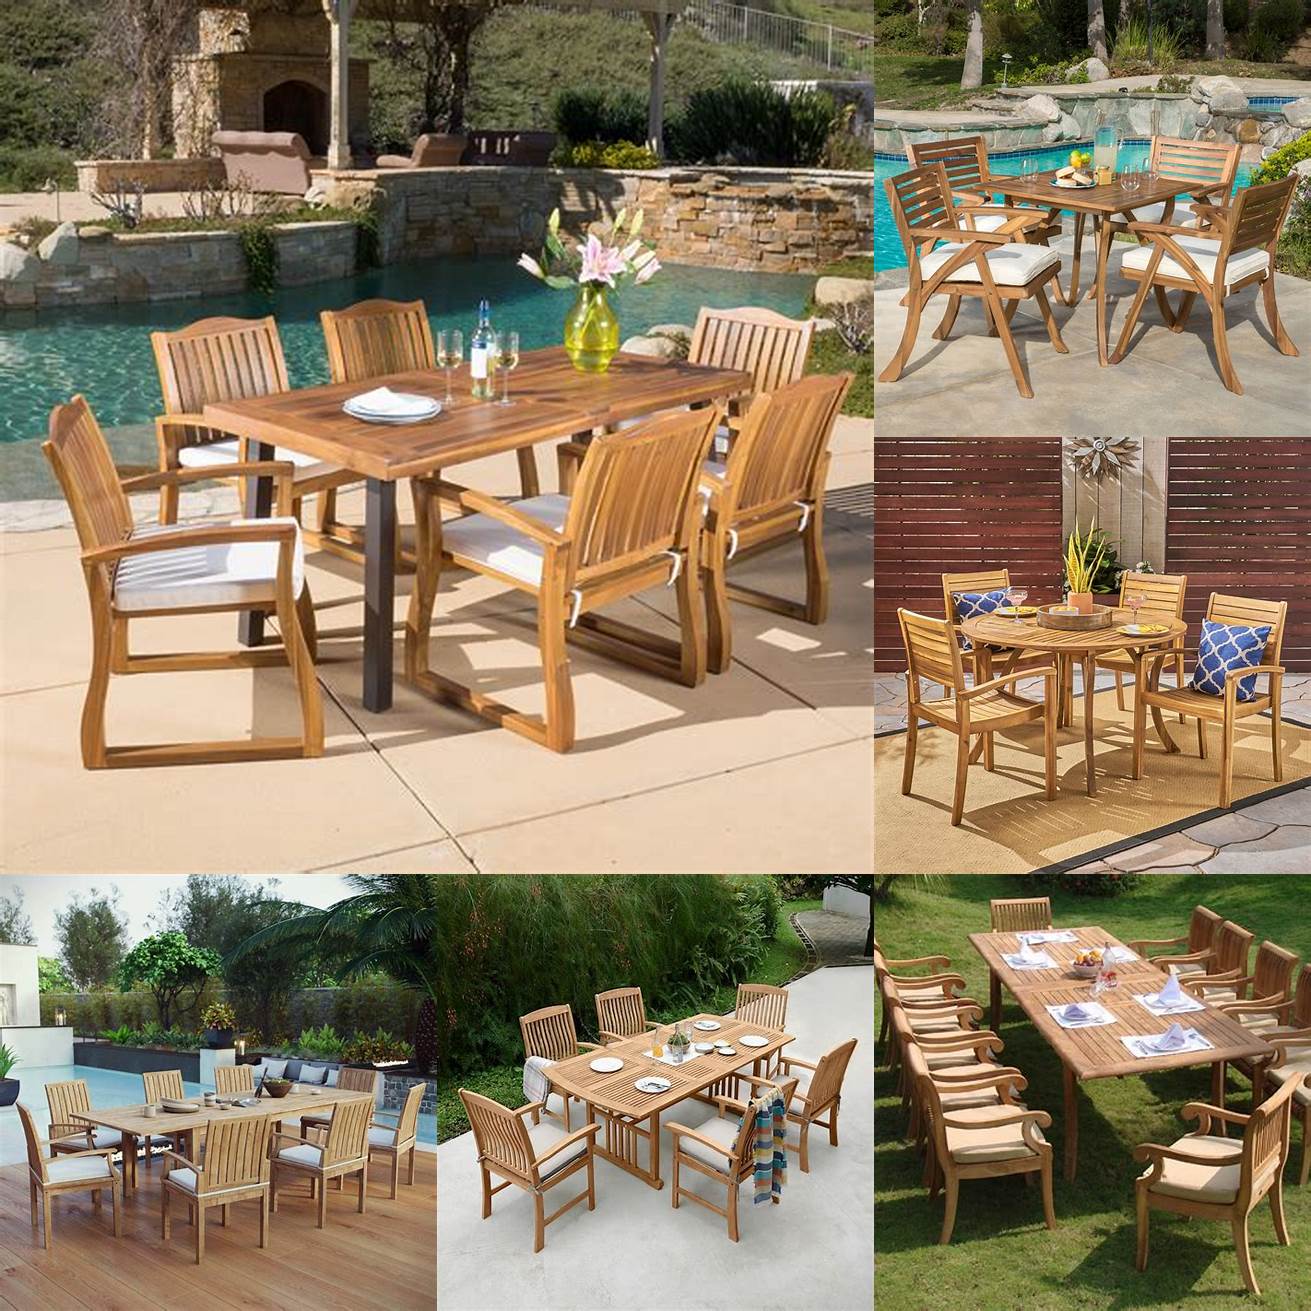 Choosing the Right Teak Wood Outdoor Dining Set for Your Home